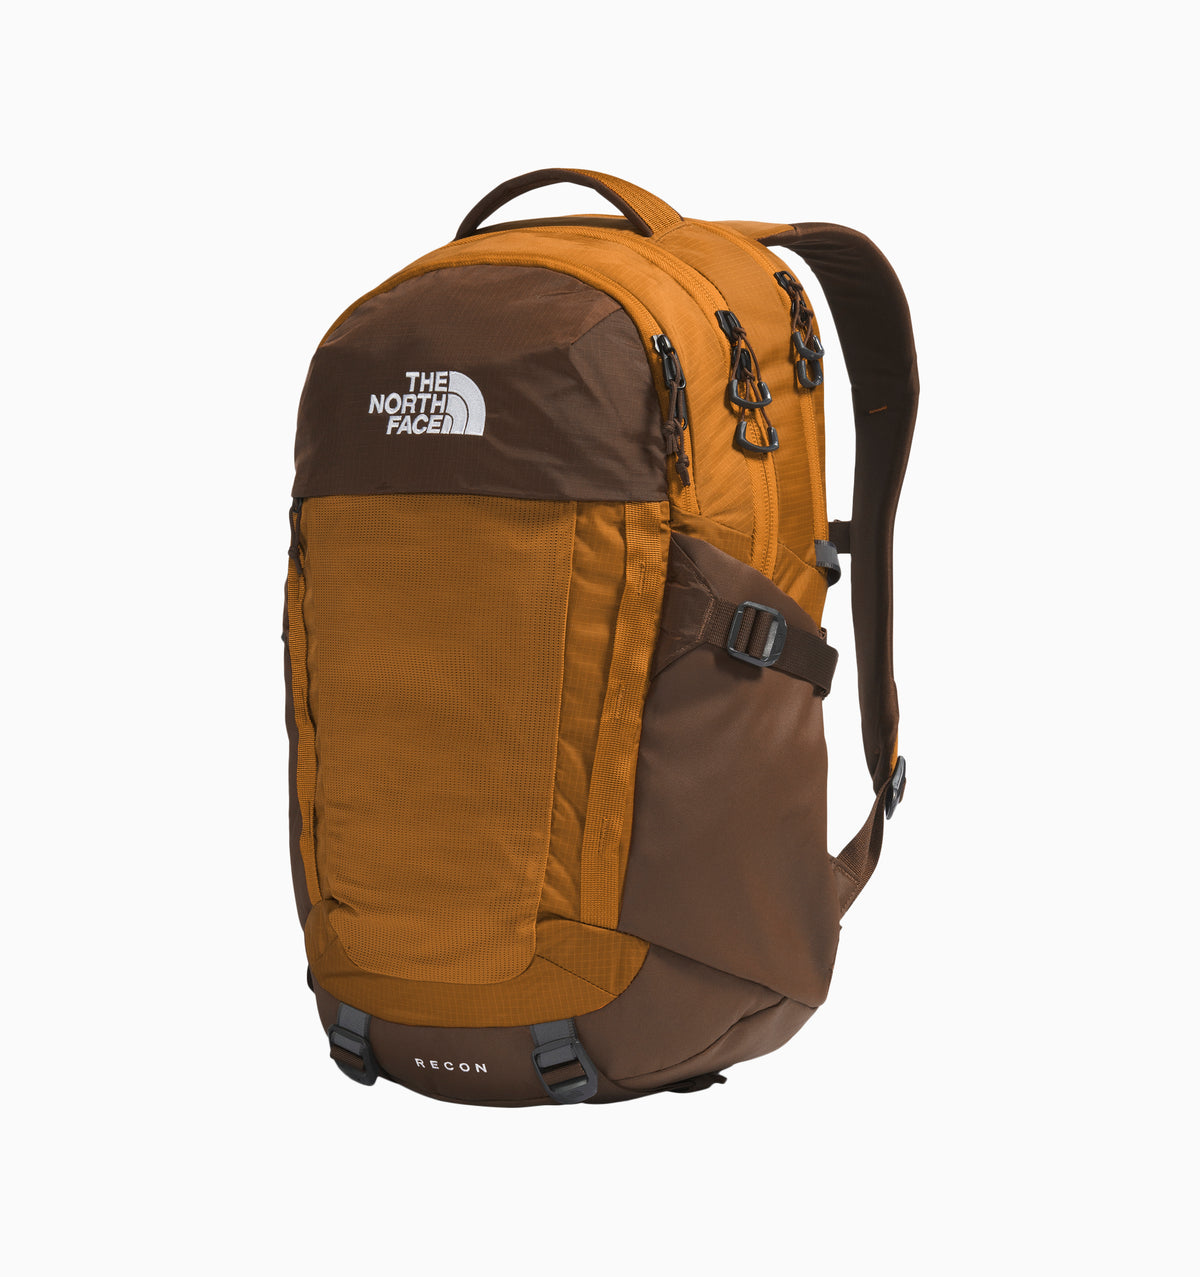 The North Face 16" Recon Laptop Backpack 30L - Timber Tan